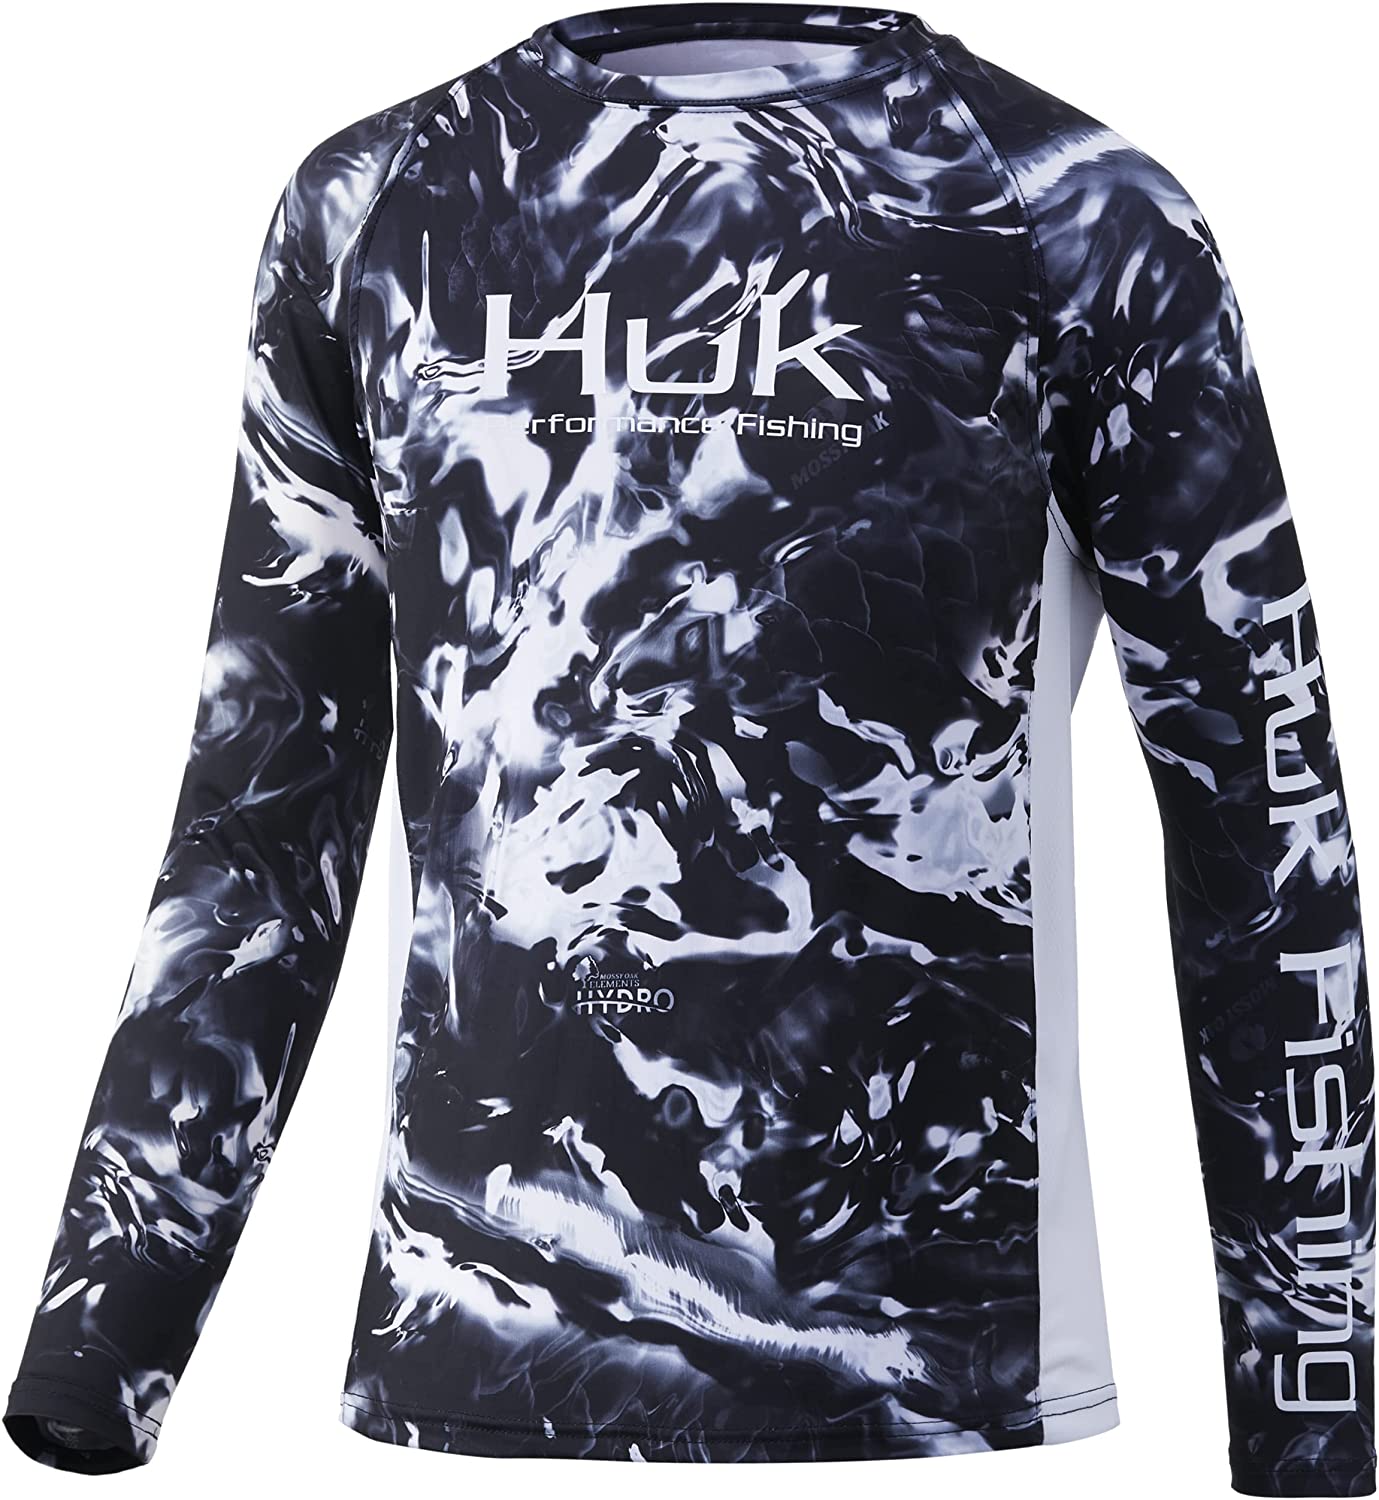 Kids Long Sleeve Performance Fishing Shirt with HUK Unisex-Child Pursuit Camo Vented 30 UPF Sun Protection